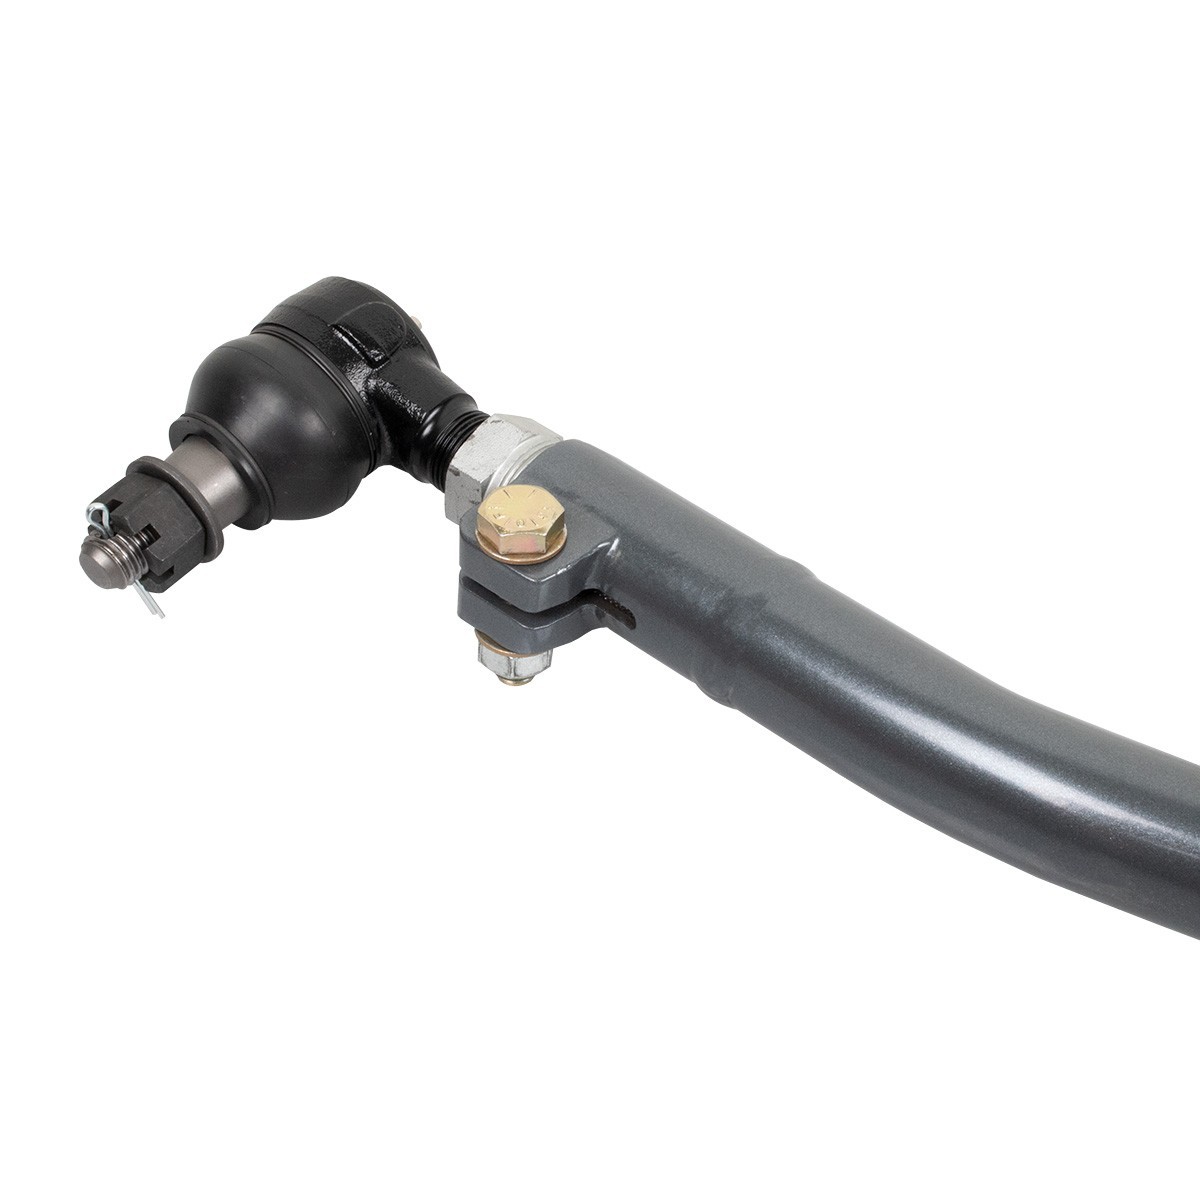 Synergy 2005+ Ford Super Duty F-250 / F-350 / F-450 / F-550 Heavy Duty Adjustable Front Track Bar